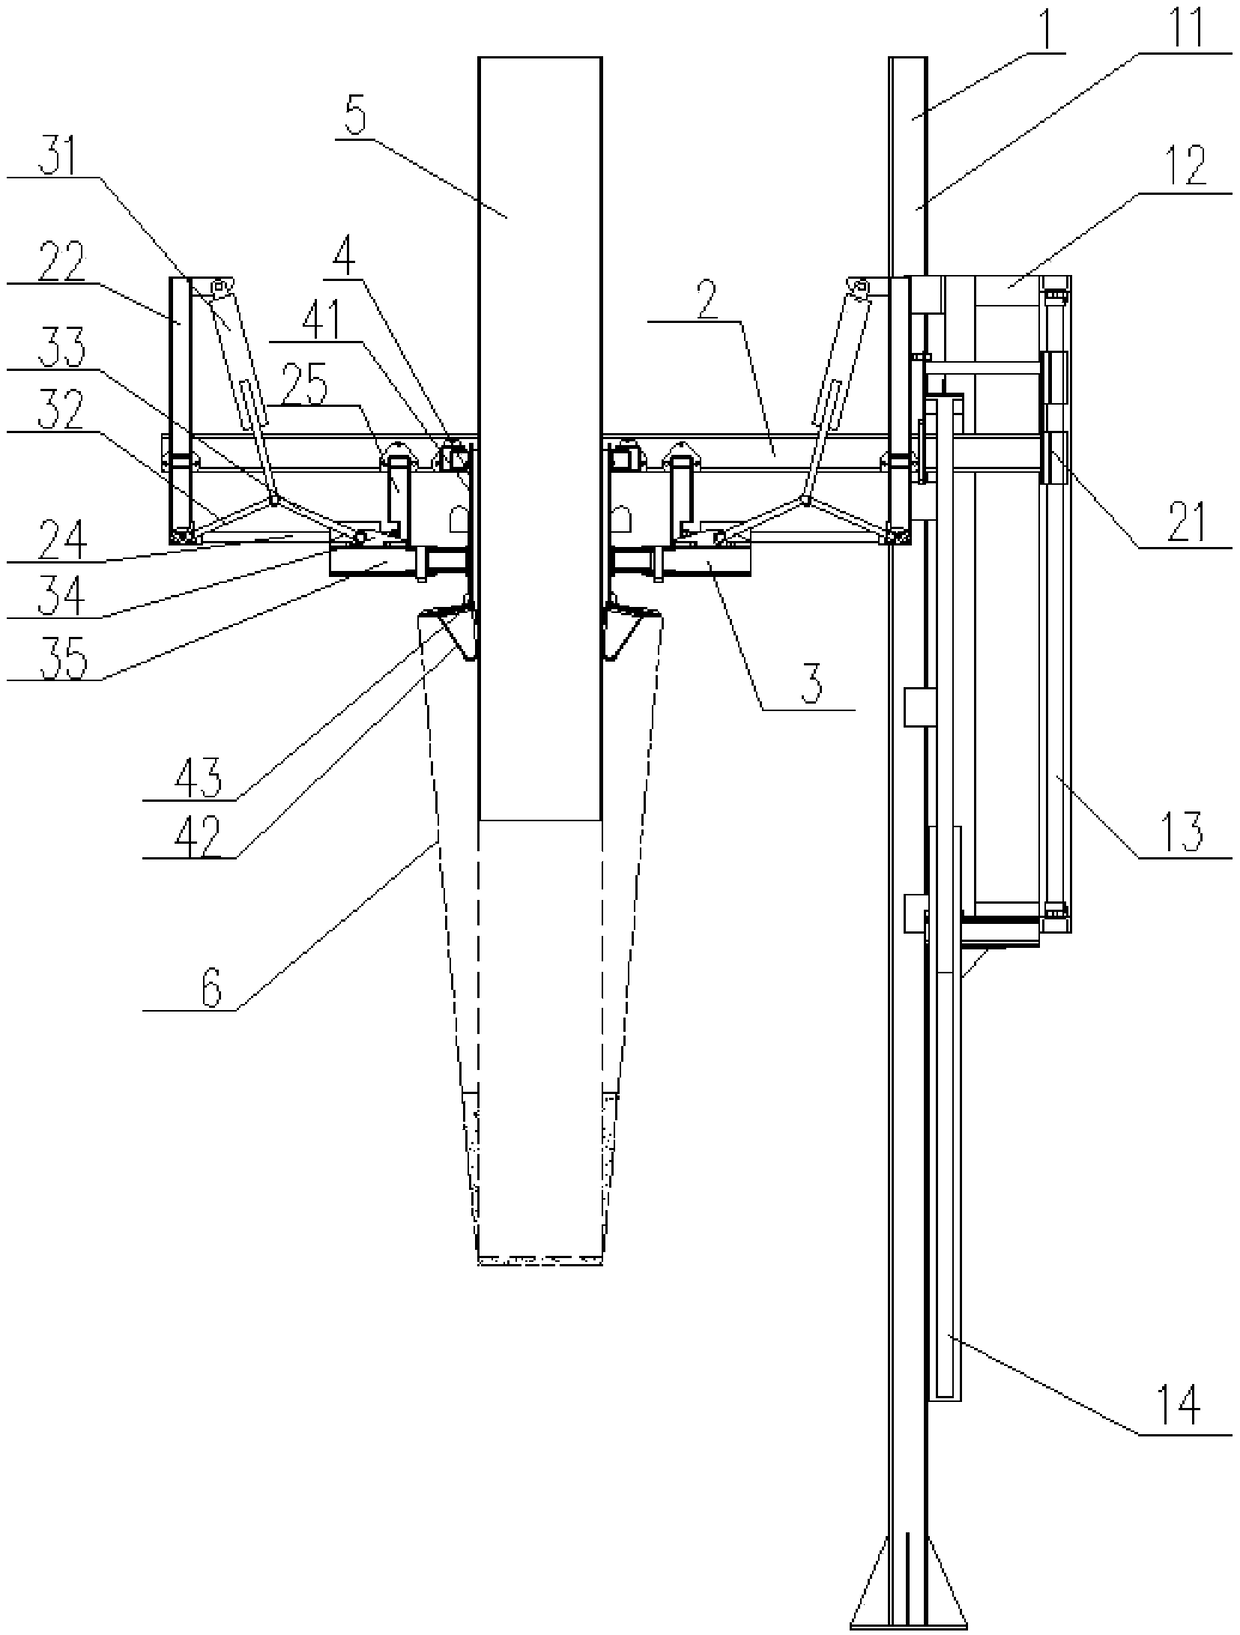 A mouth tensioning device for ton bags